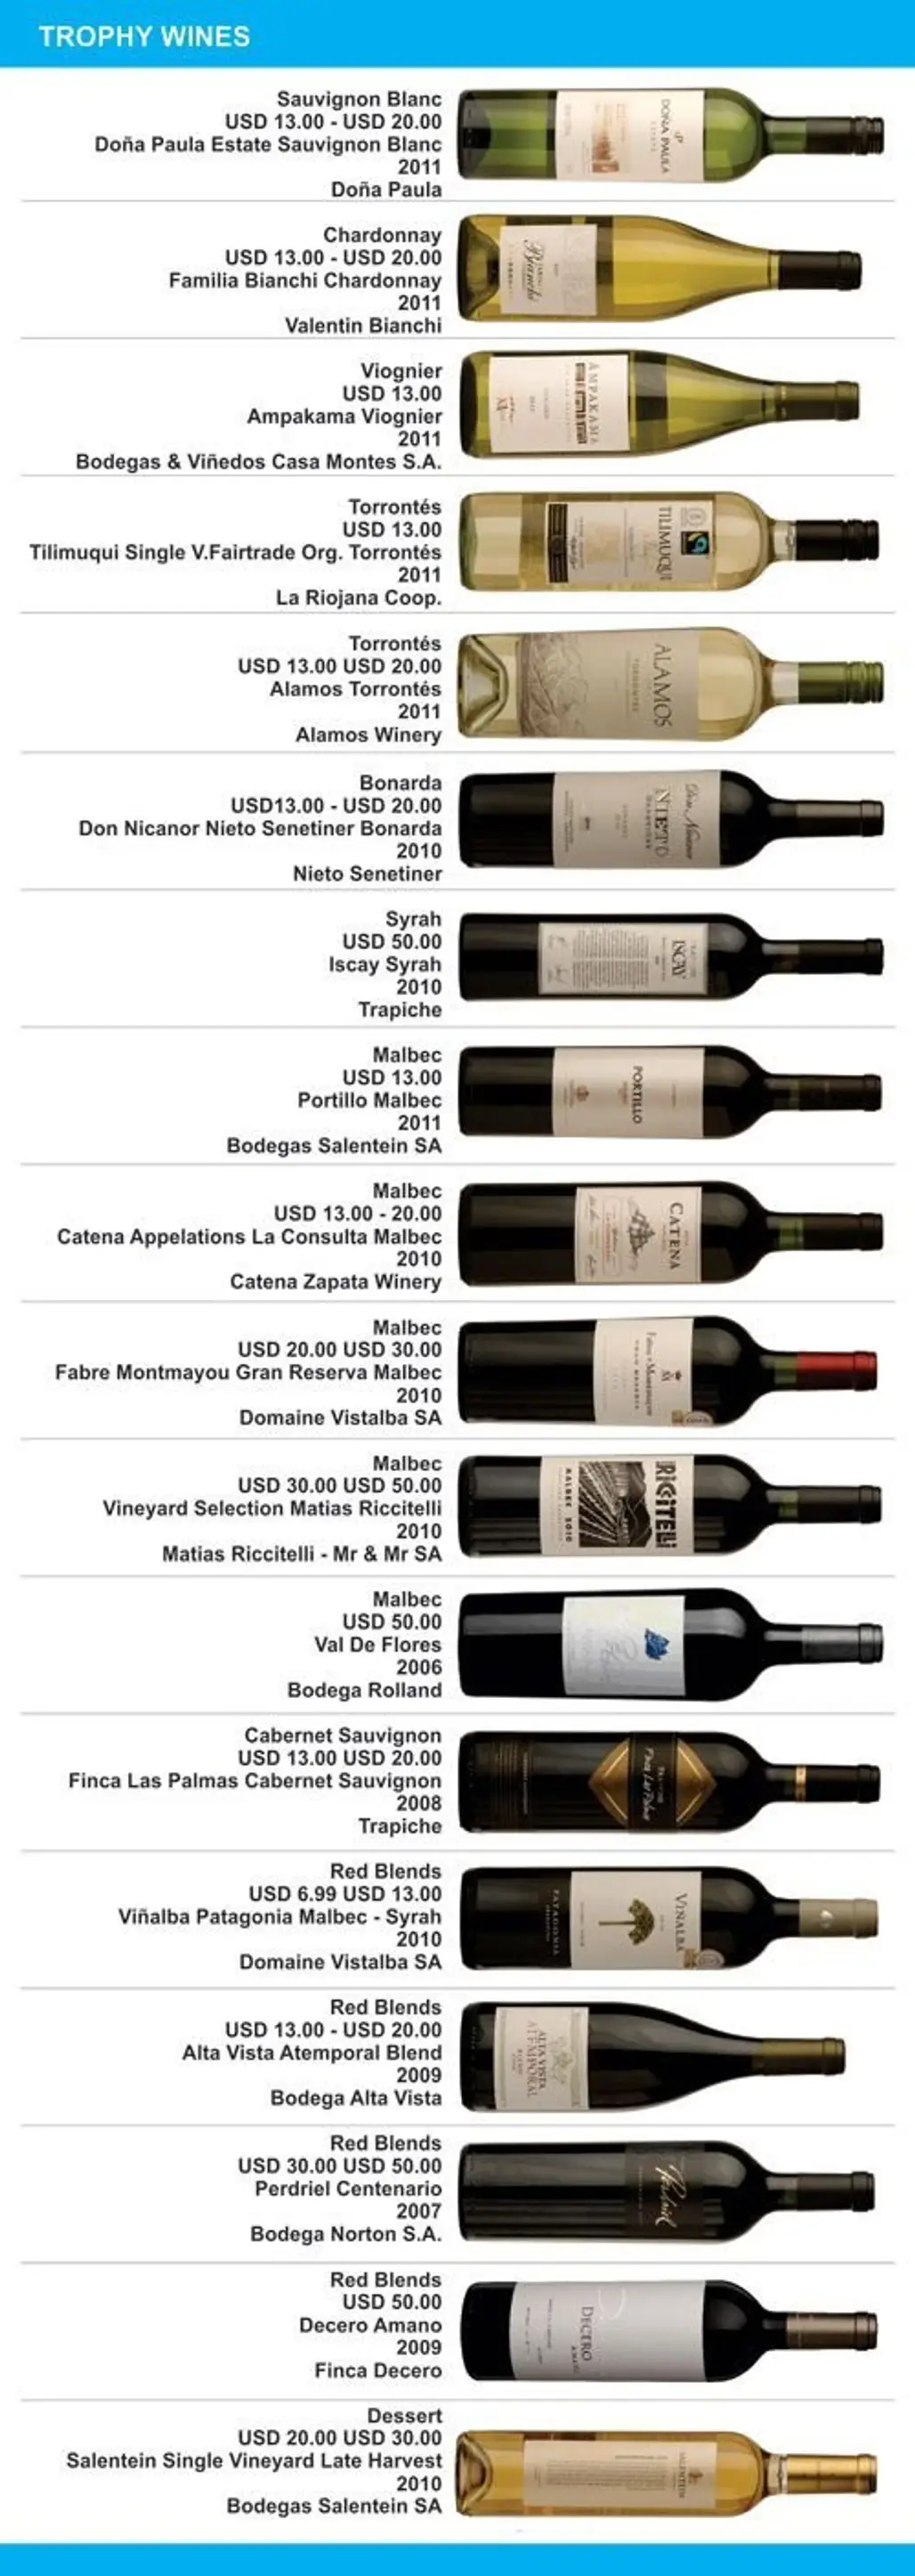 Some Trophy Wines, for You to Pick out the Best!